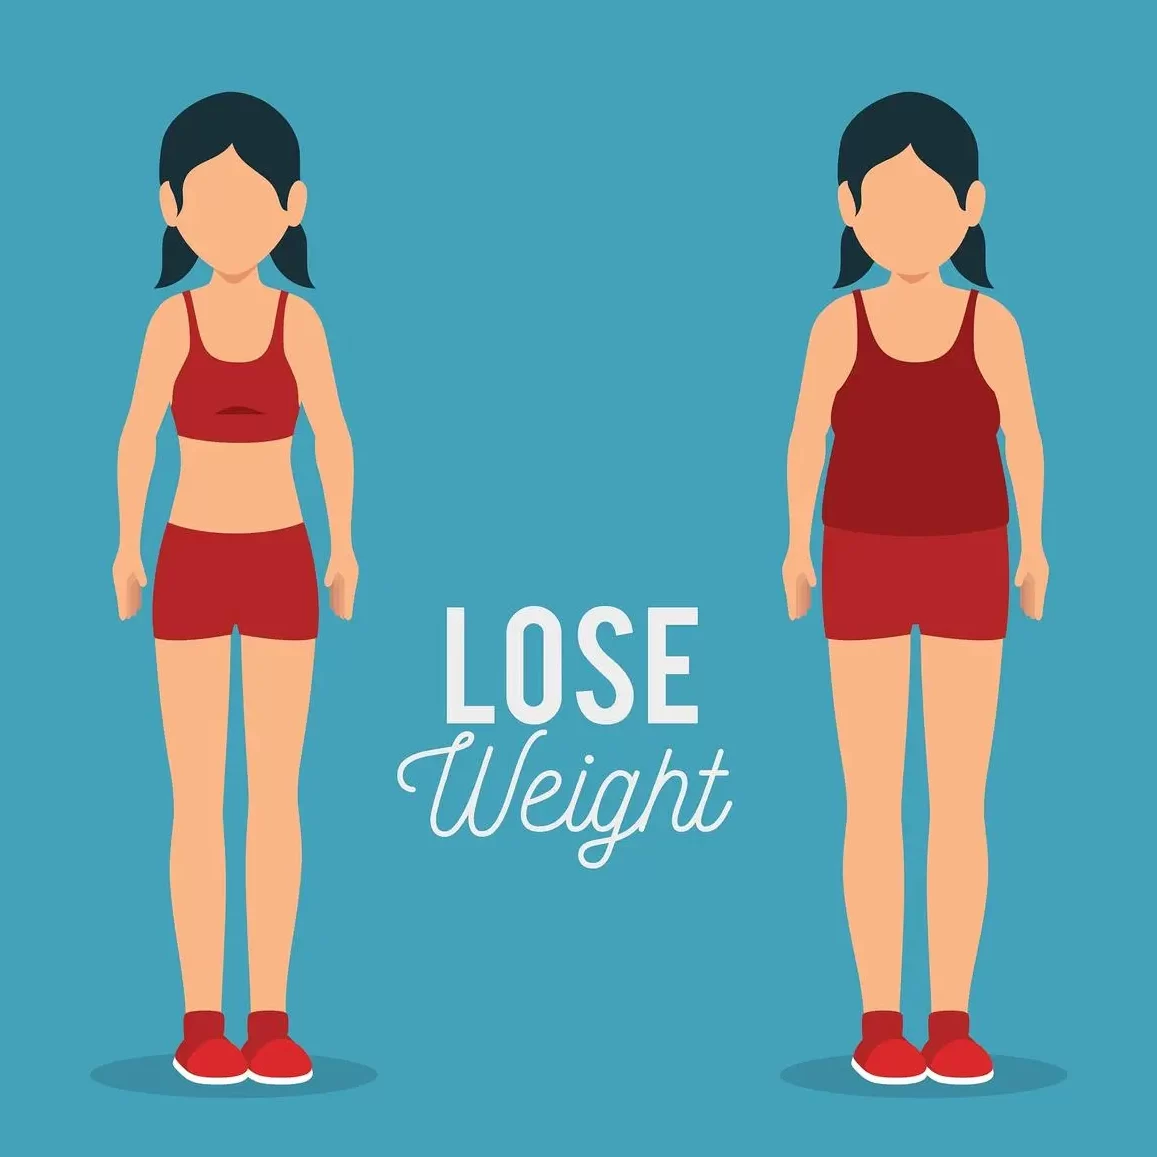 Why do many people give up on losing weight soon after they start?